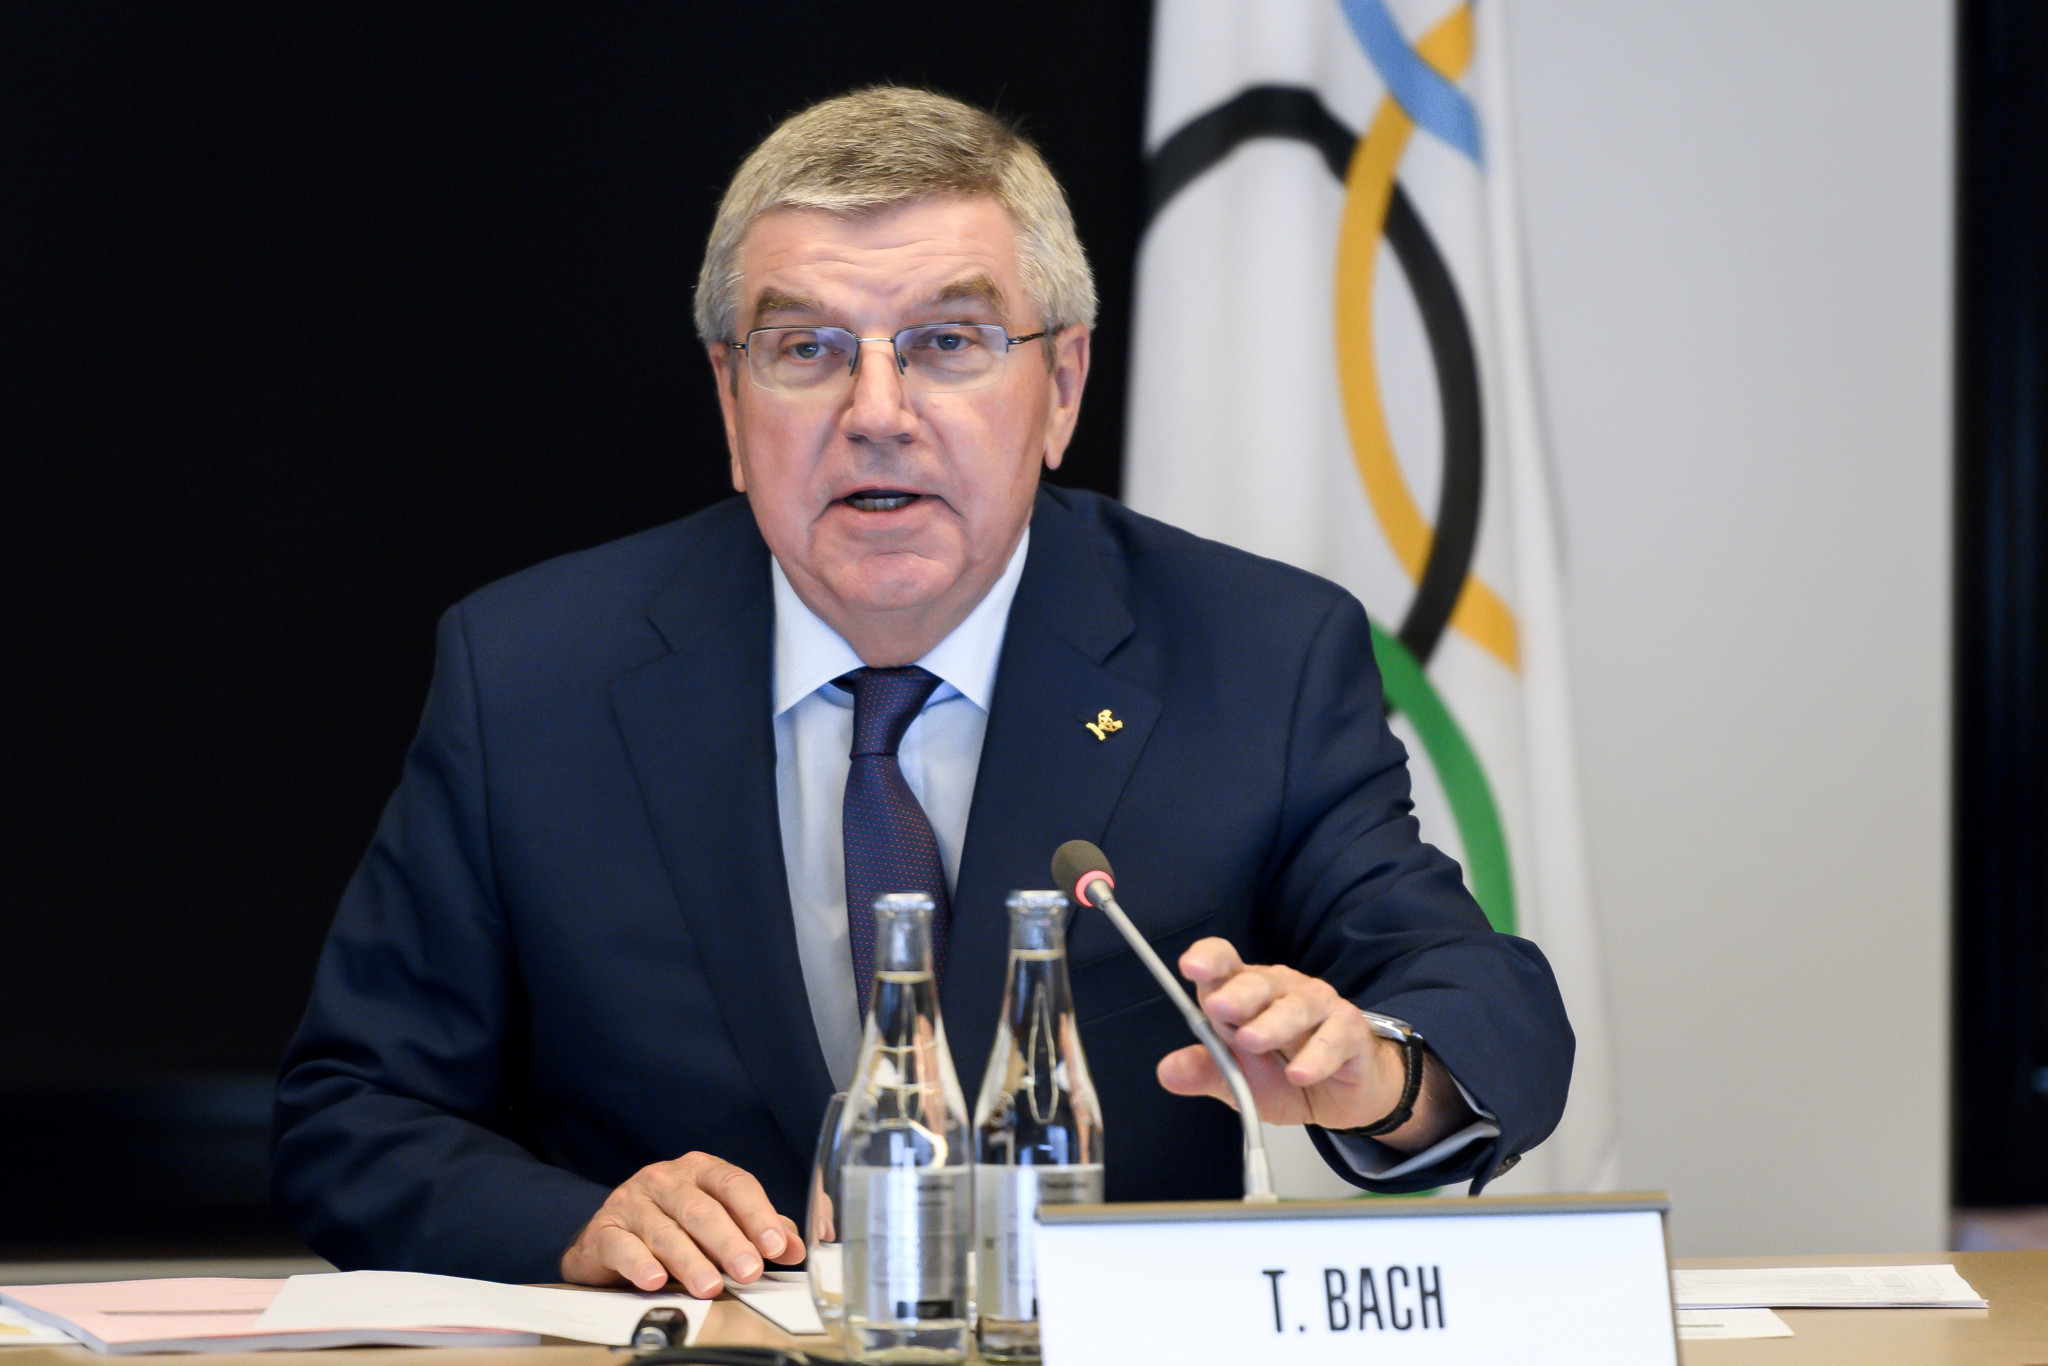 IOC President Thomas Bach has his trusted allies and lieutenants, who are often given high-profile roles within the organisation ©Getty Images